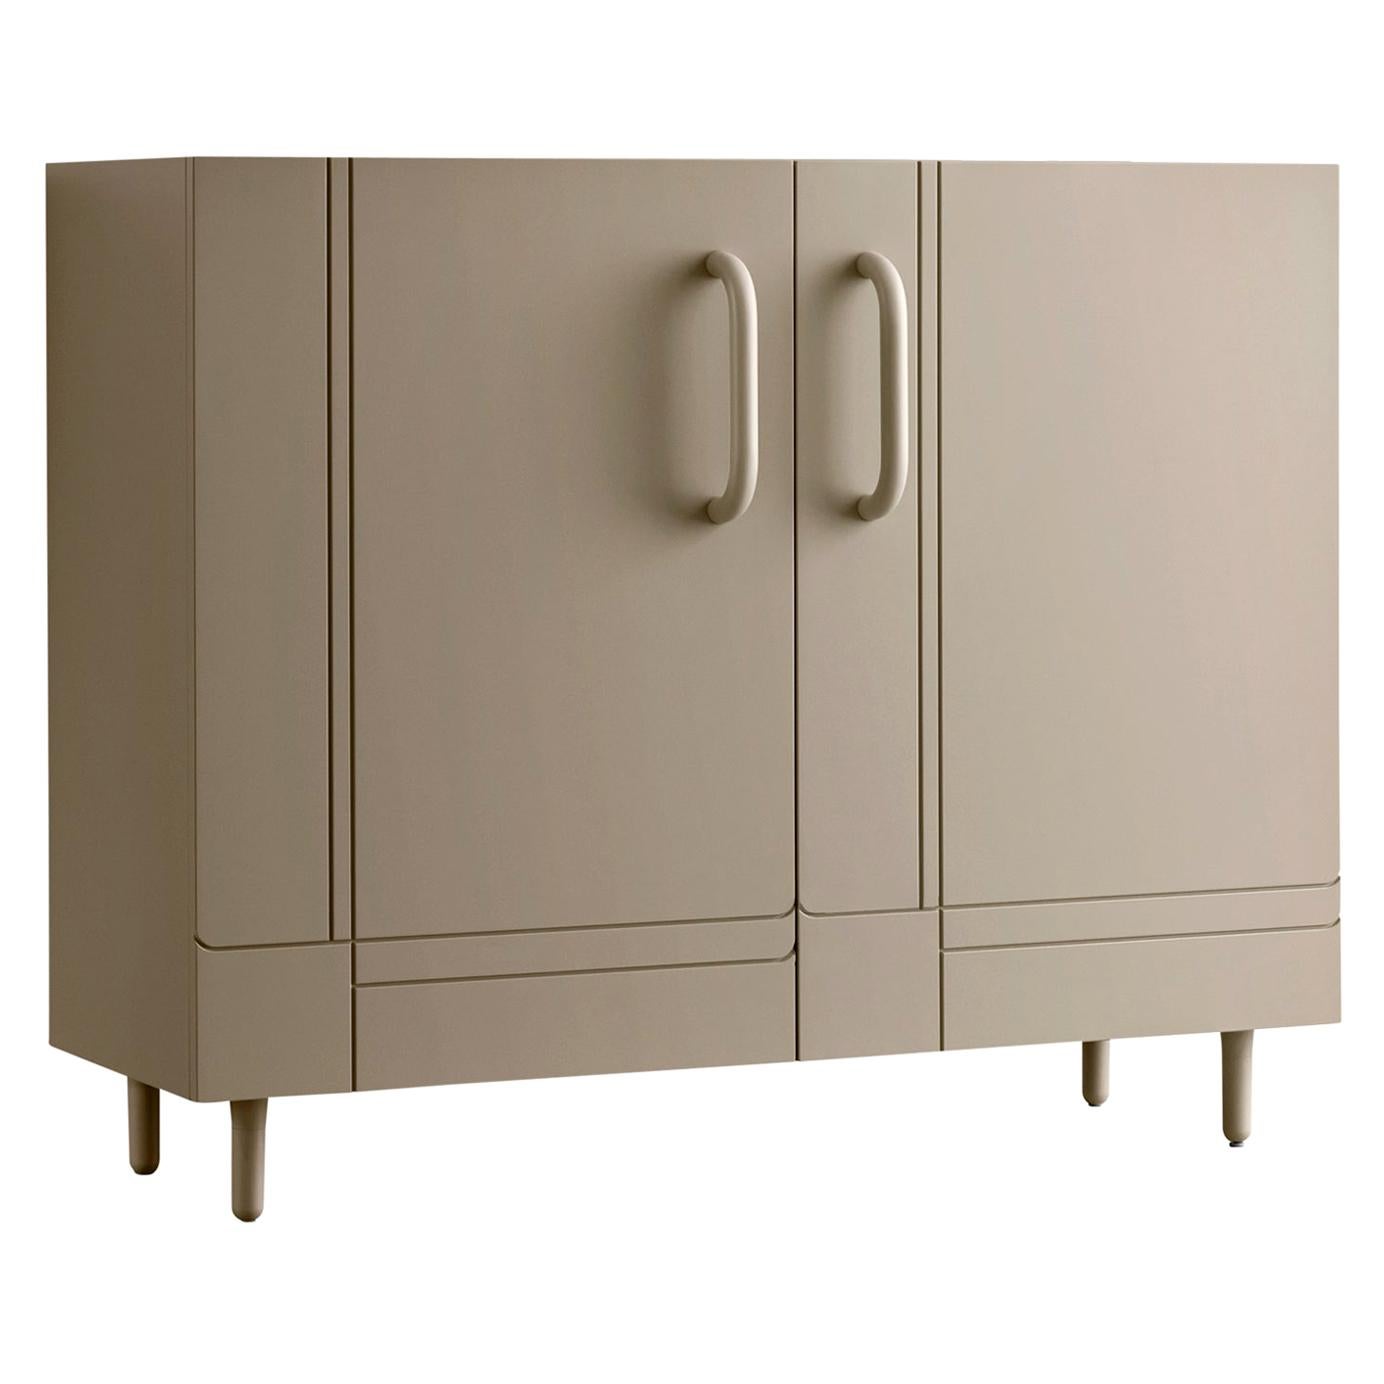 Dalila Vertical Cabinet in Beige Million Lacquered Structure by Miniforms Lab